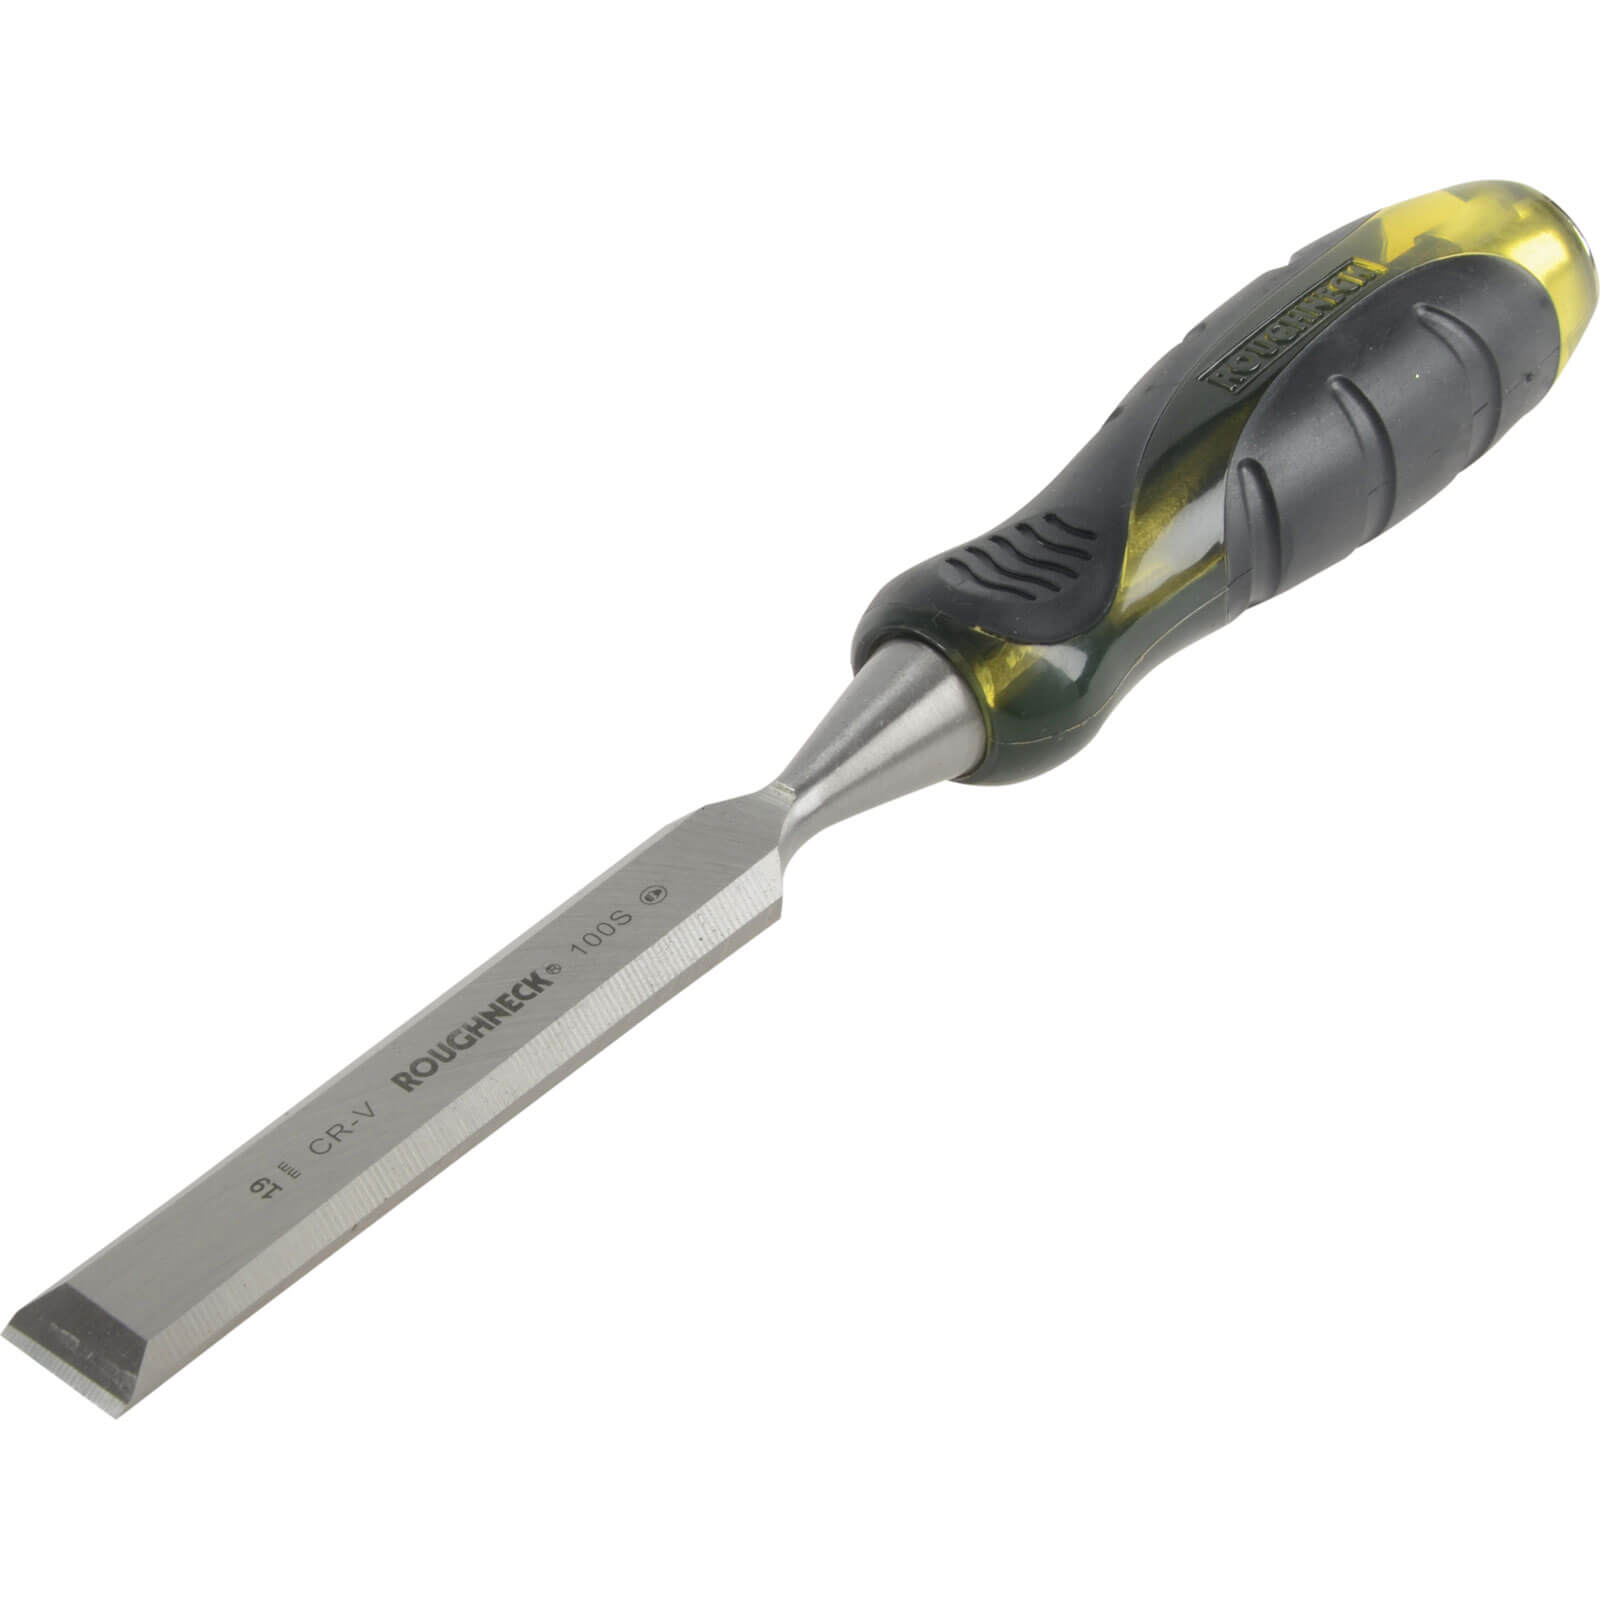 Image of Roughneck Professional Bevel Edge Wood Chisel 19mm